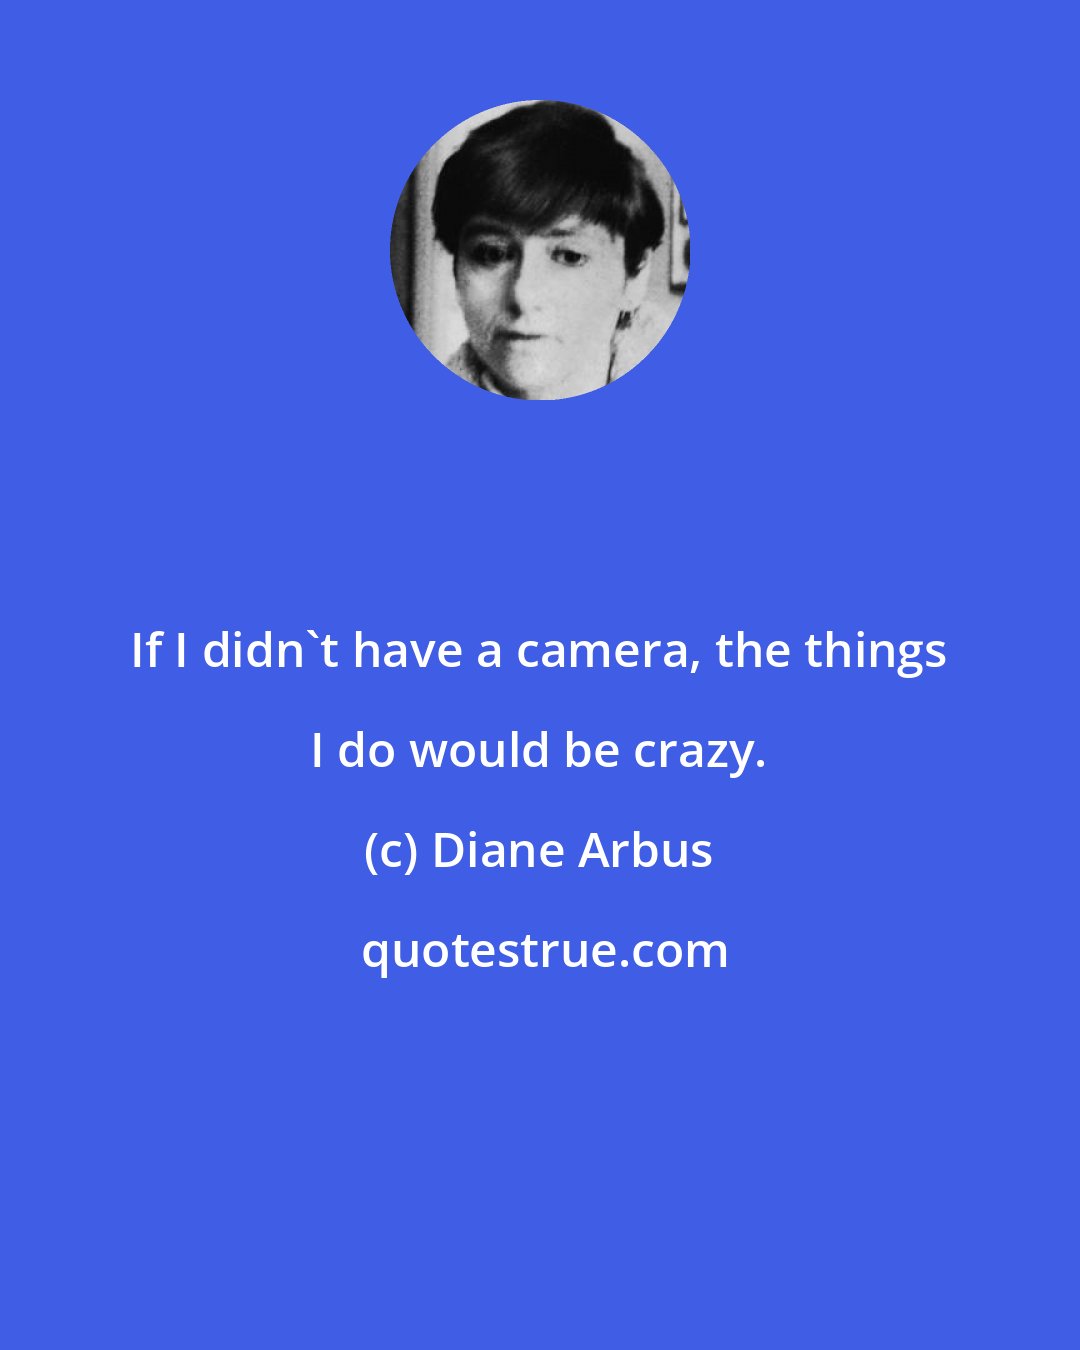 Diane Arbus: If I didn't have a camera, the things I do would be crazy.